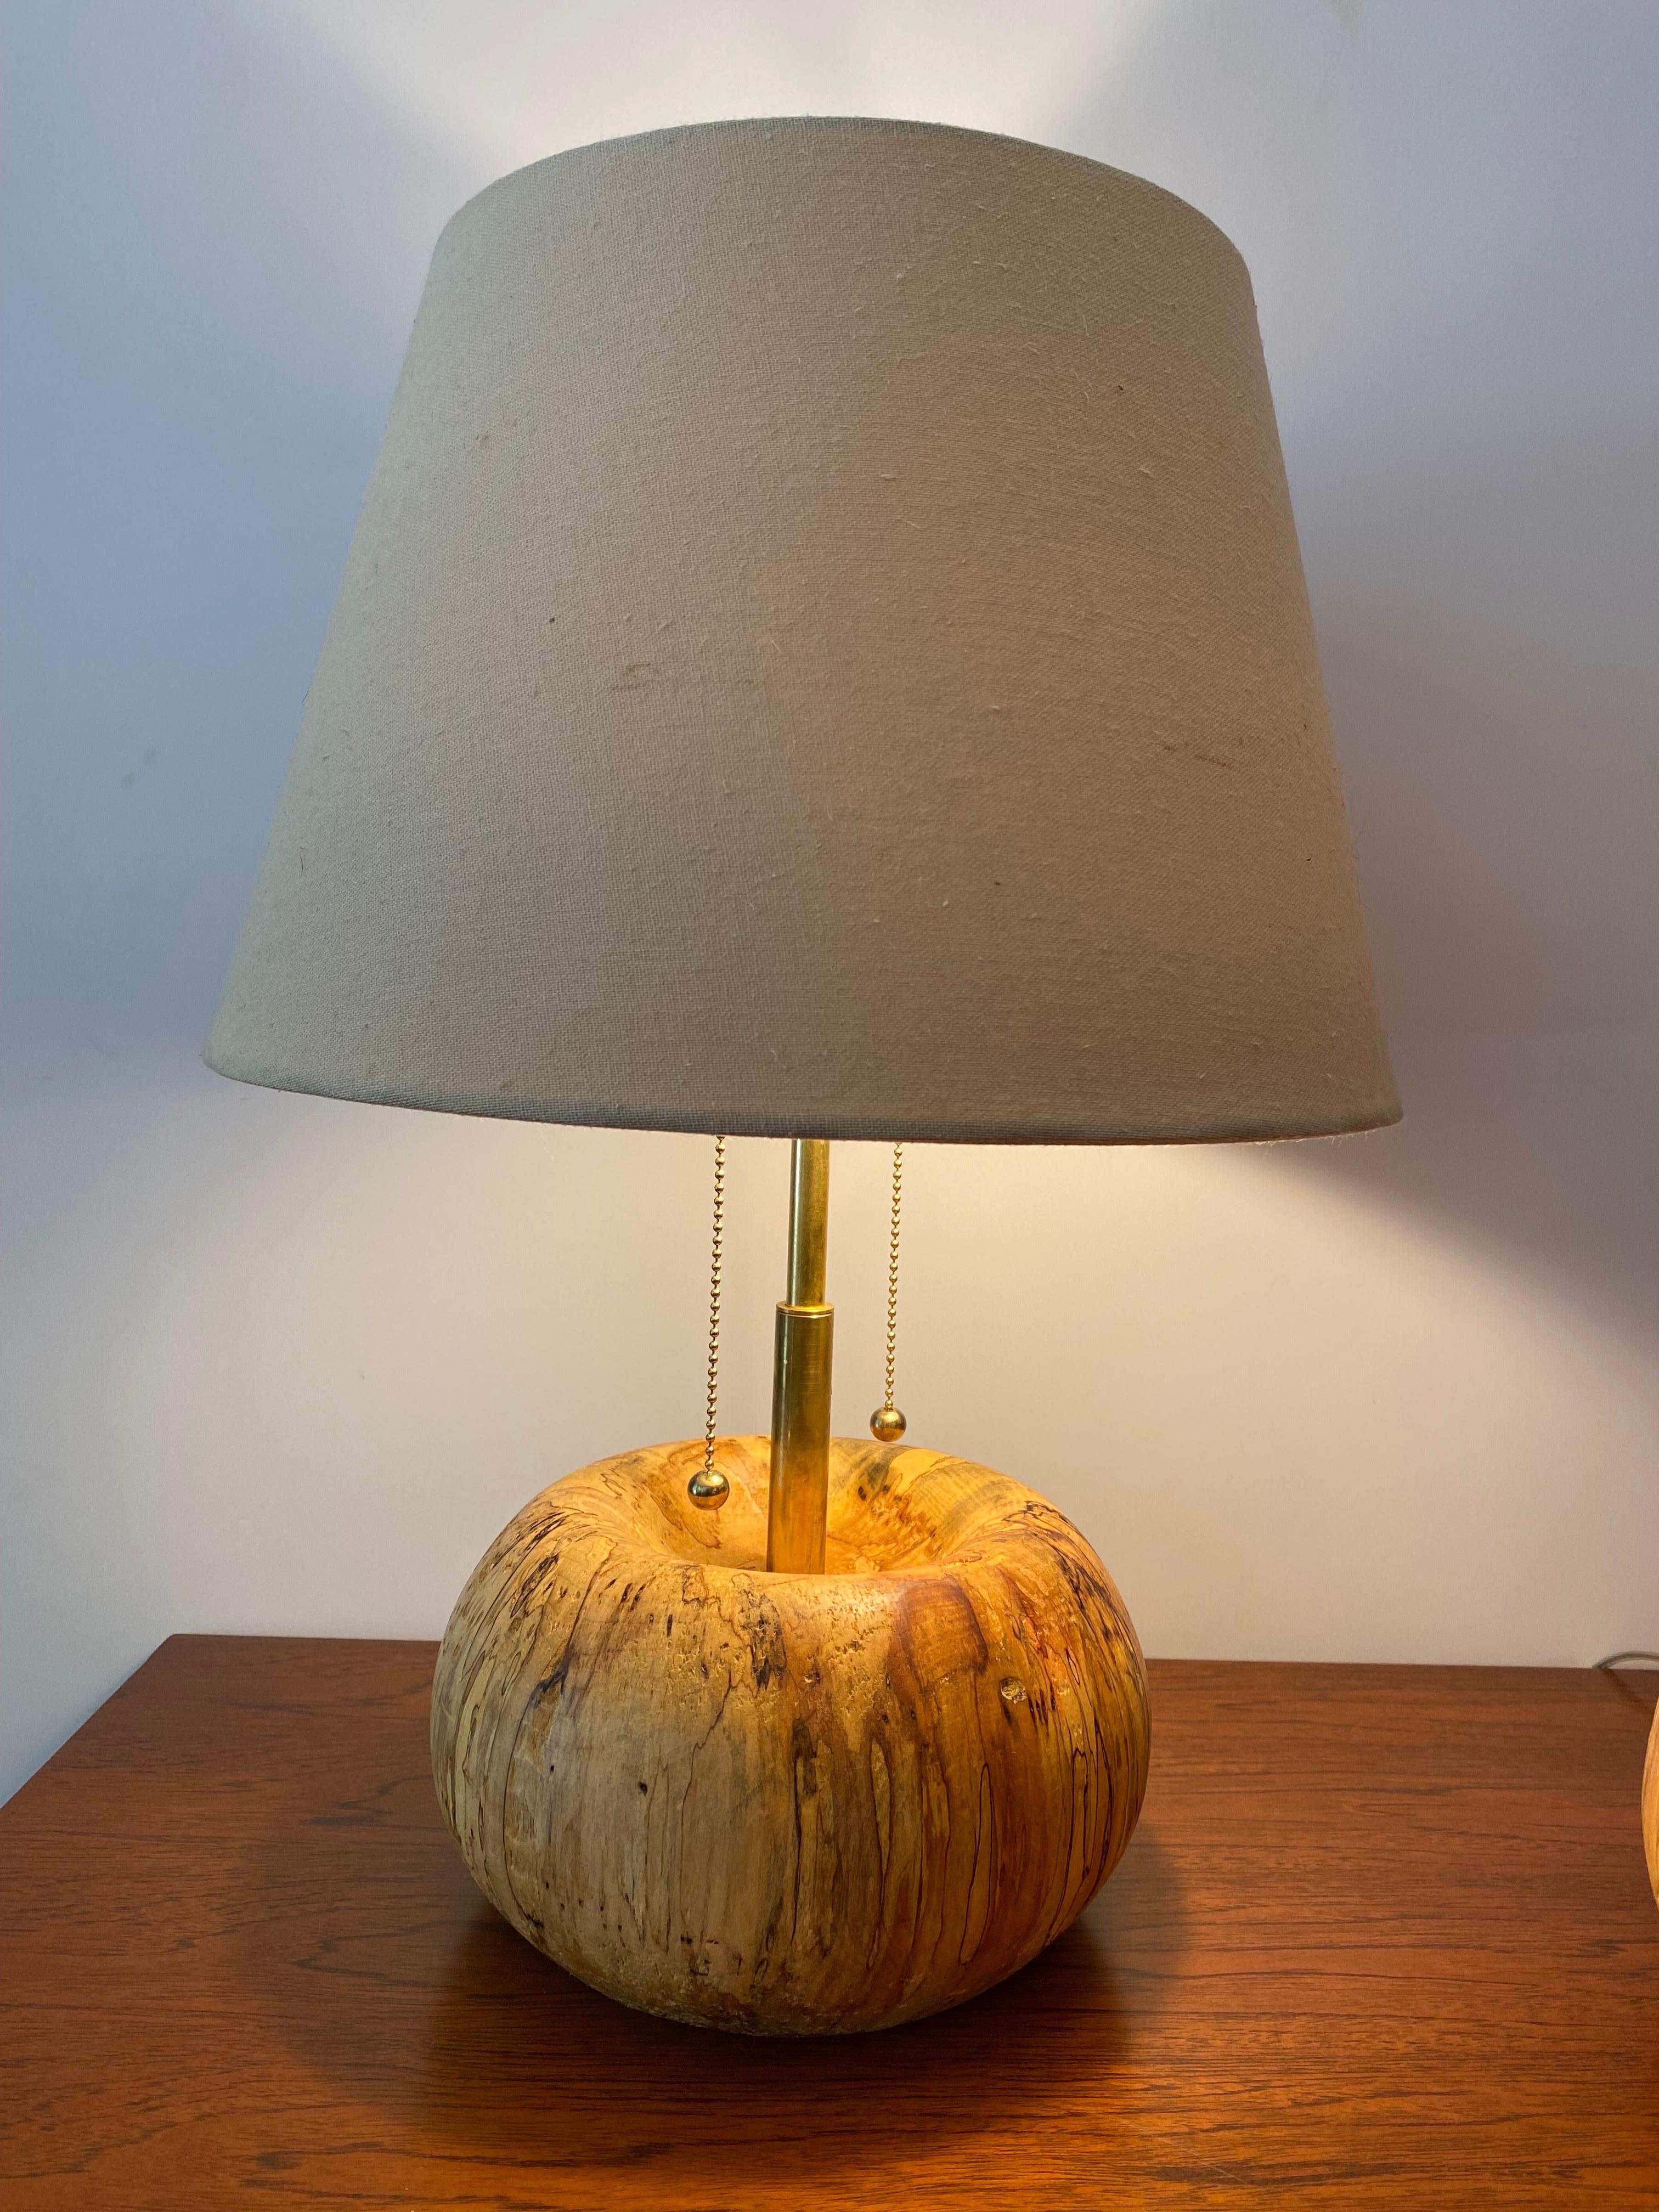 The bases of this pair of Morchella lamps are made from turned end-grain spalted maple. Spalting occurs when fungi invade and digest wood. The line patterns that form are called zone lines. These zone lines are barriers that fungal agents produce in